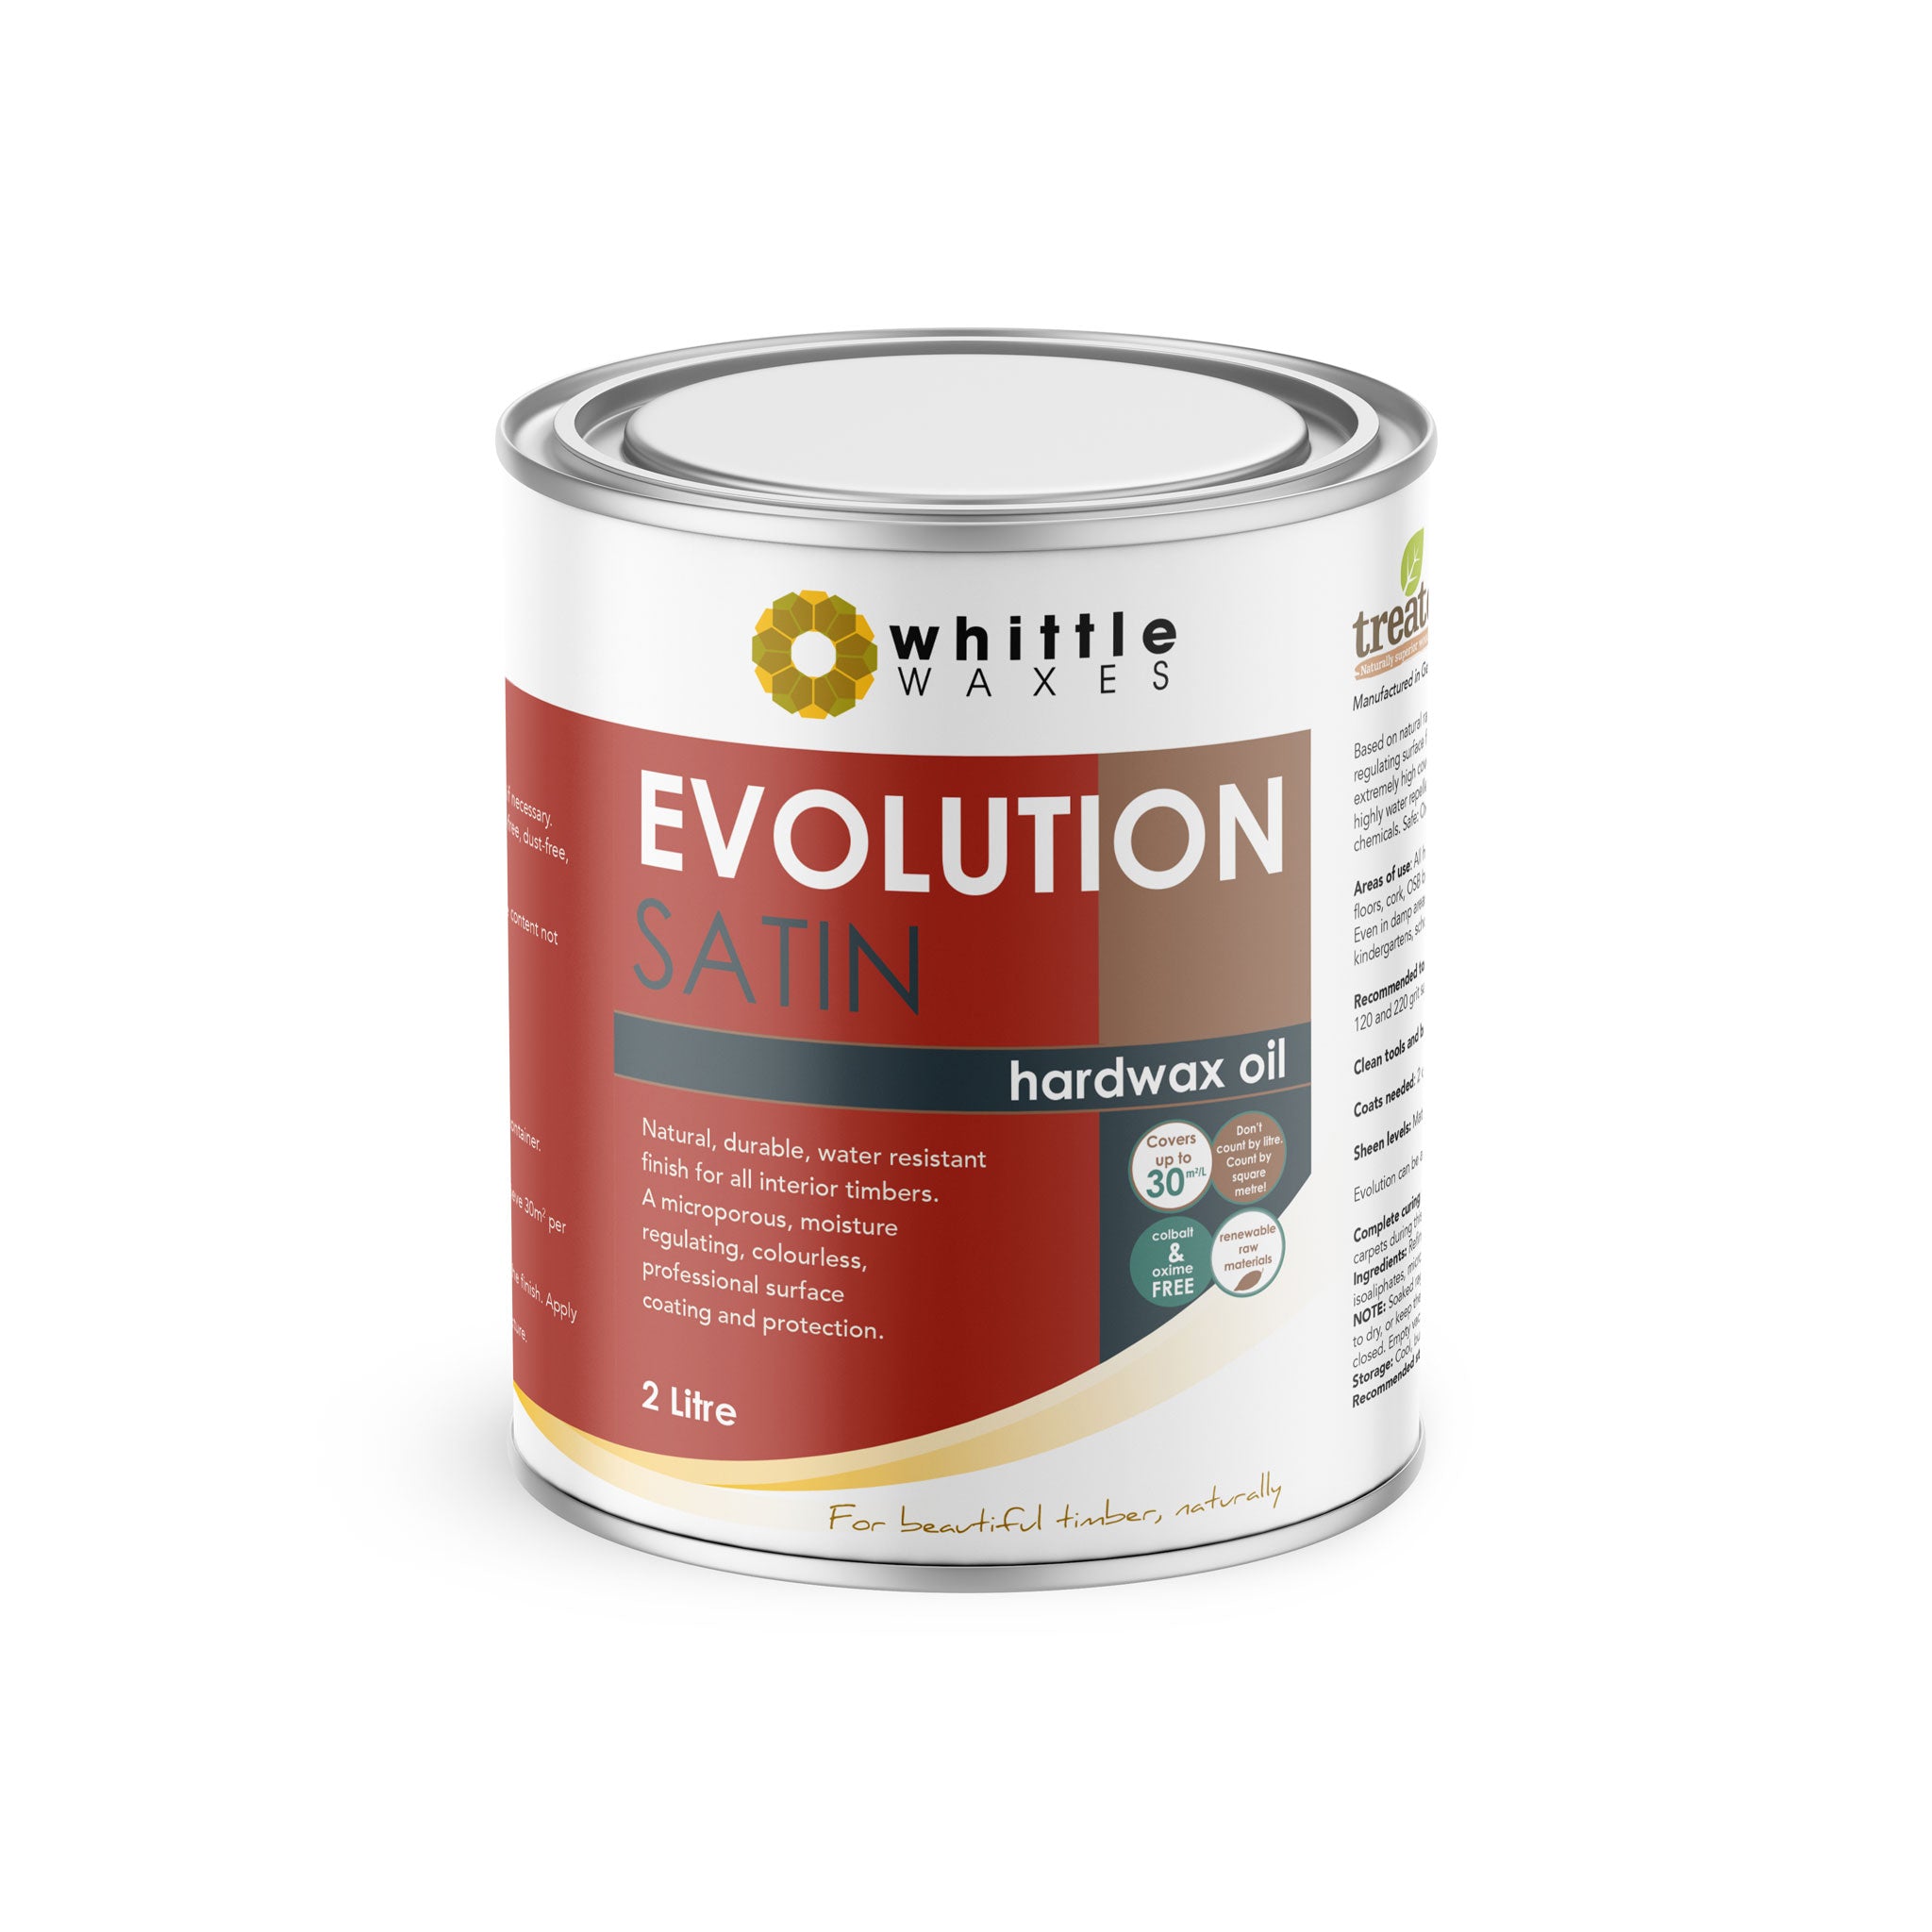 Whittle Waxes Evolution Hardwax Oil (Satin) - quality, durable, natural timber protection - 2 Litre